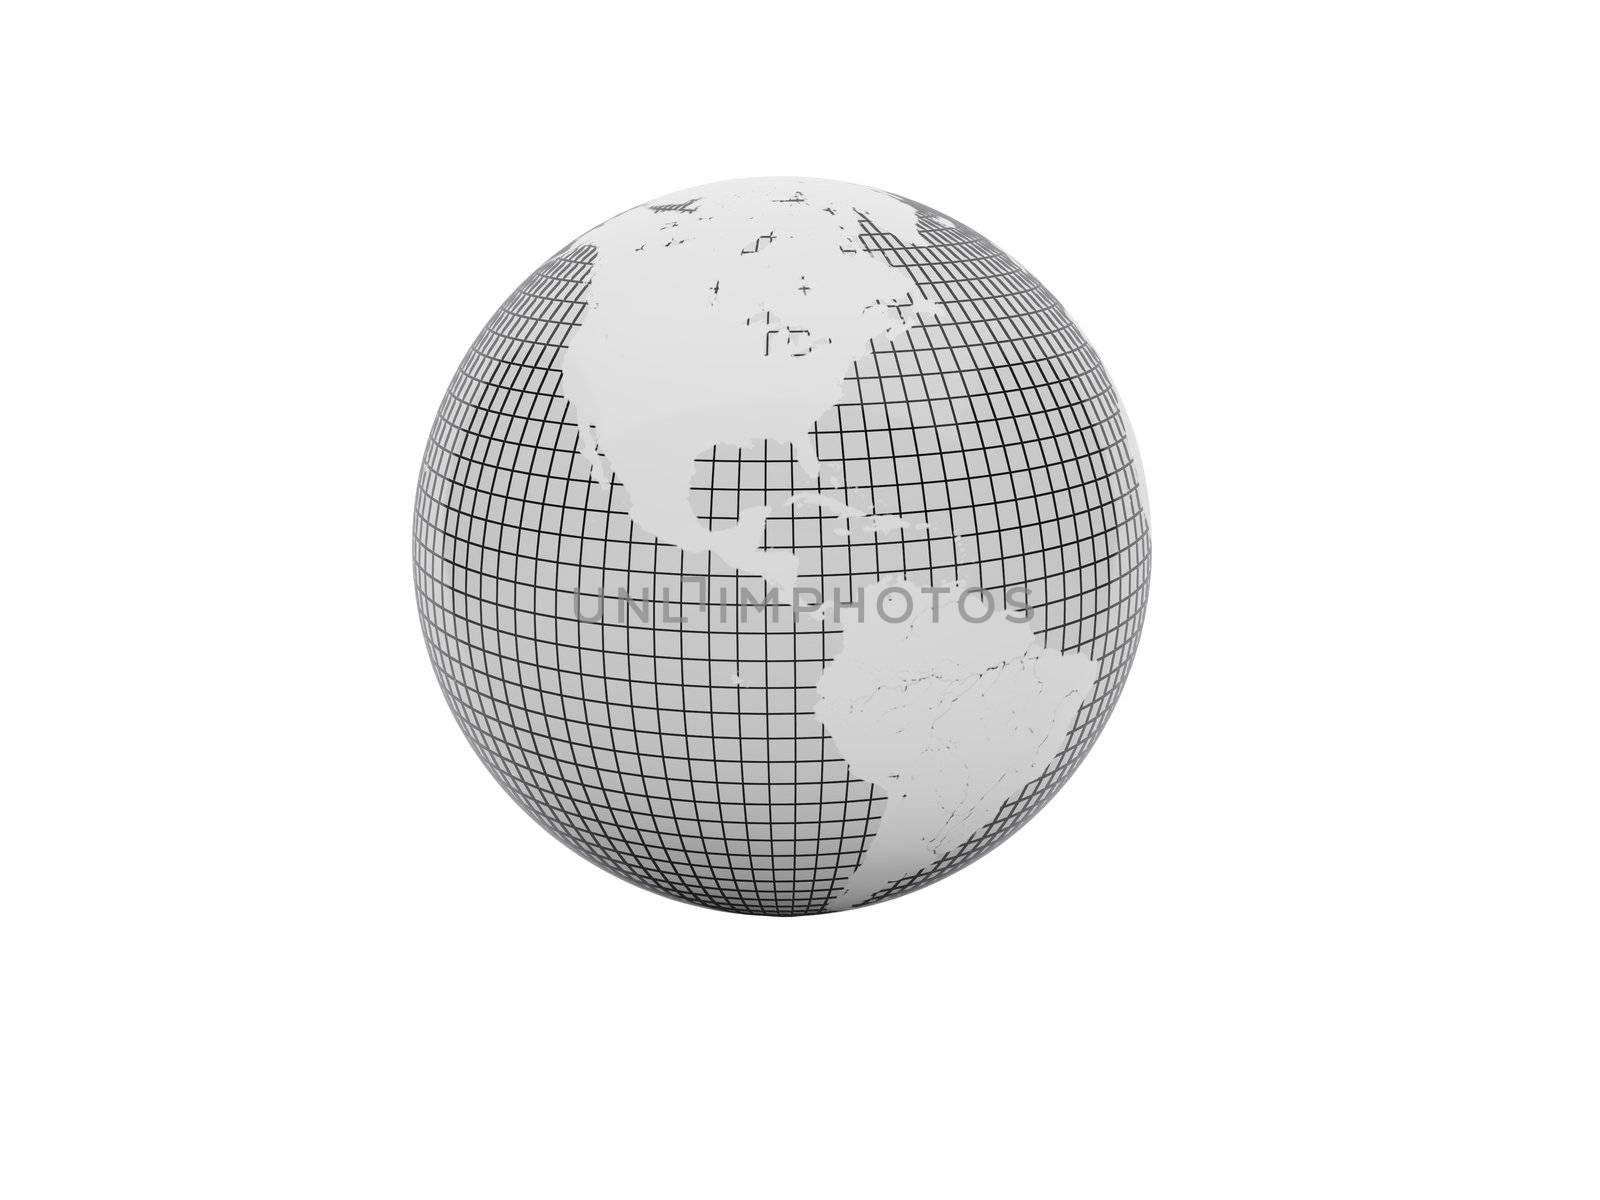 Globe of the World by rook